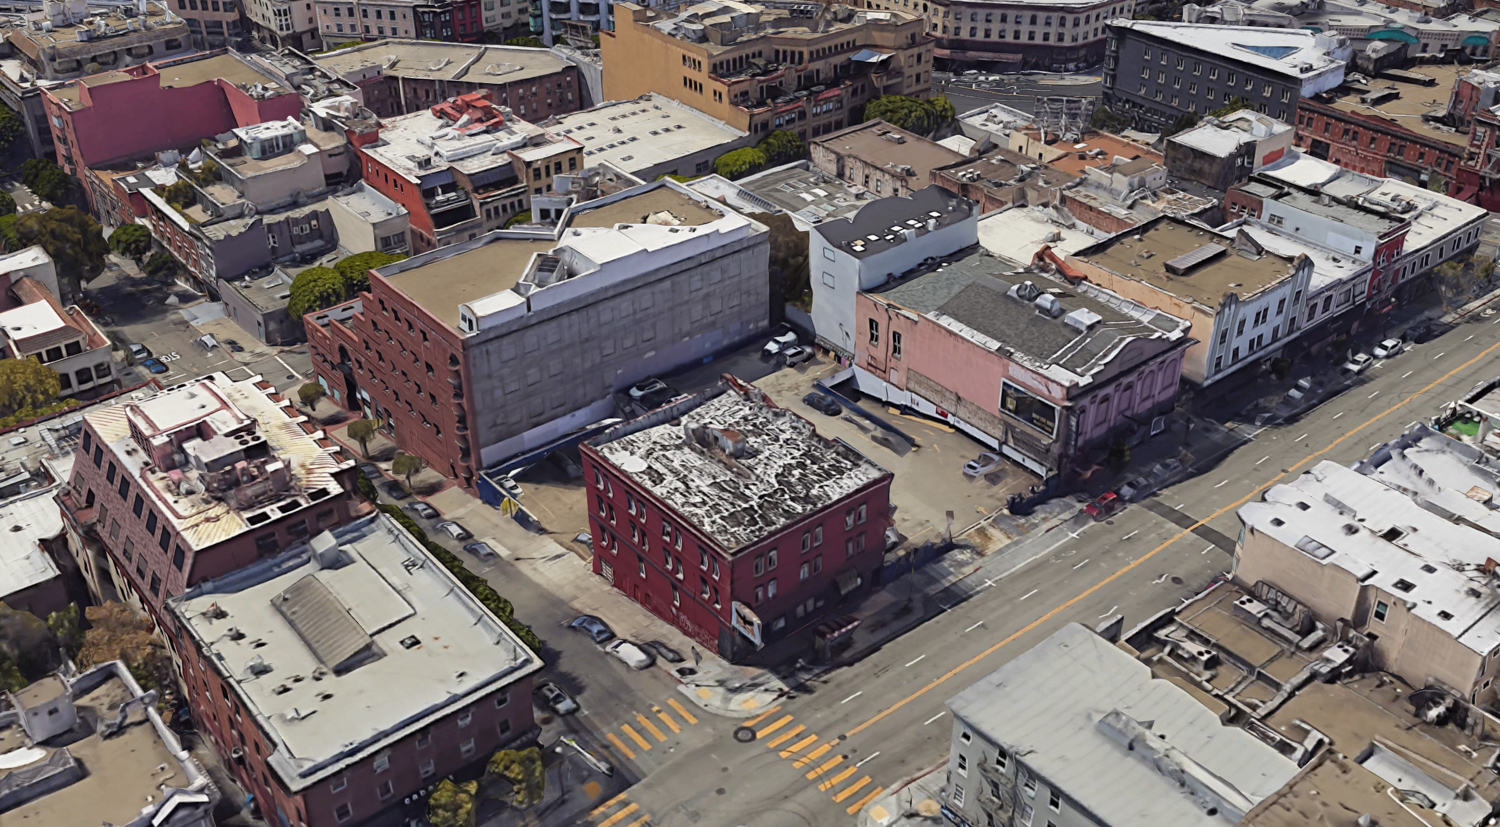 425 Broadway in its existing condition, image via Google Satellite